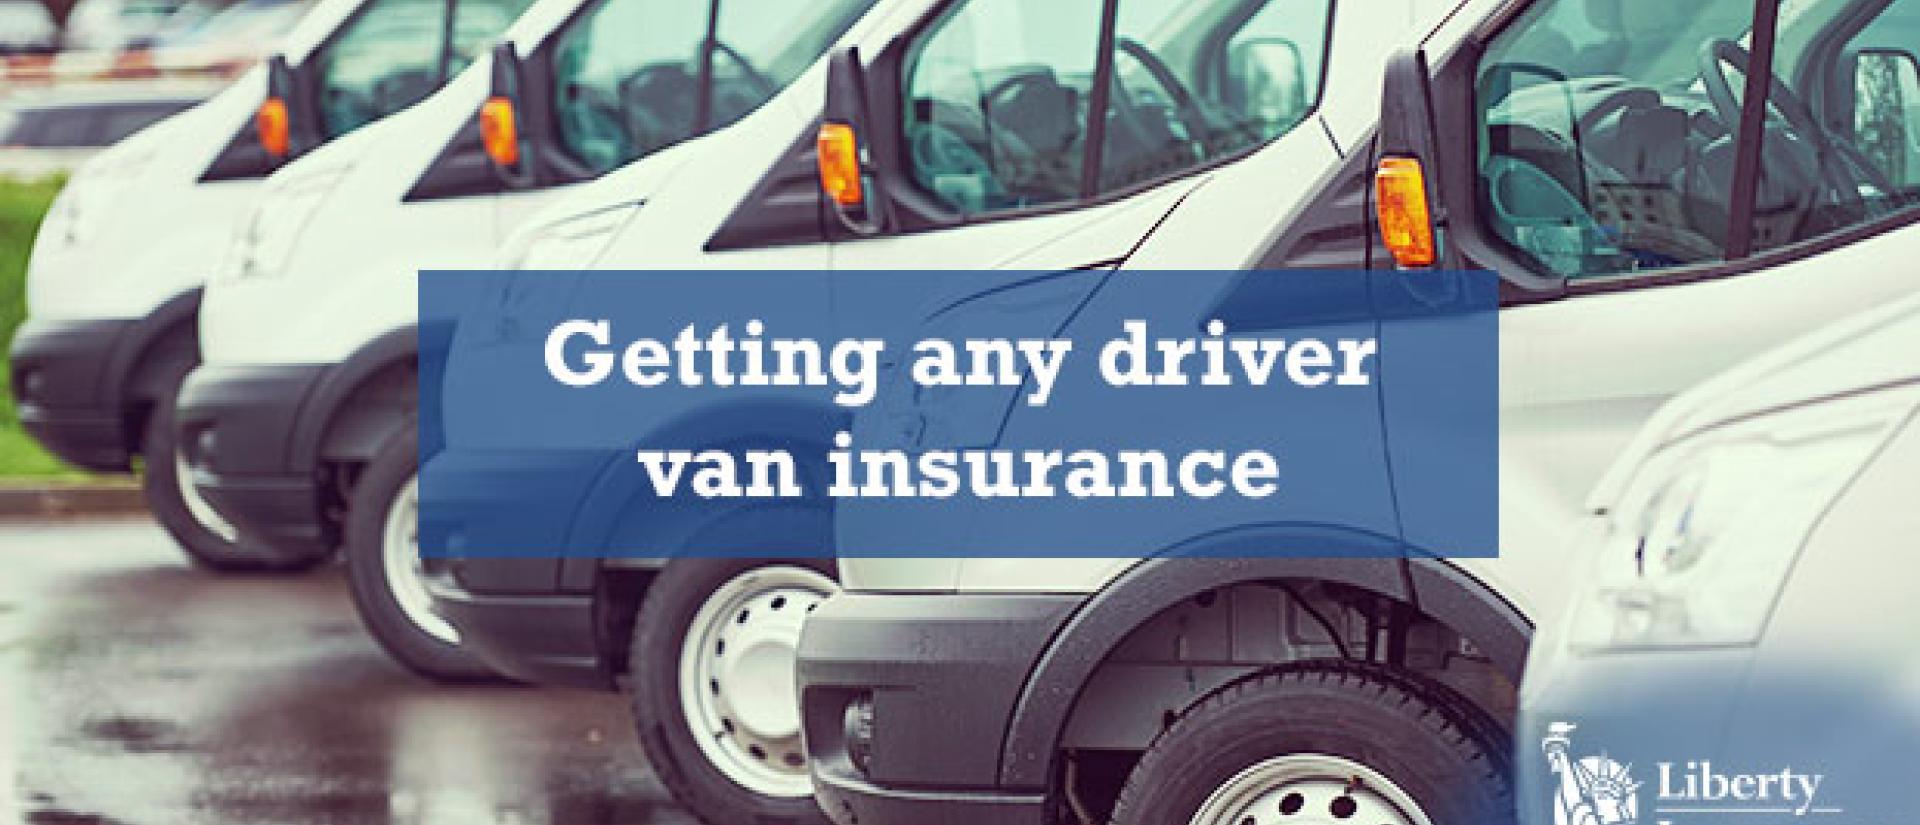 Getting Any Driver Van insurance in Ireland